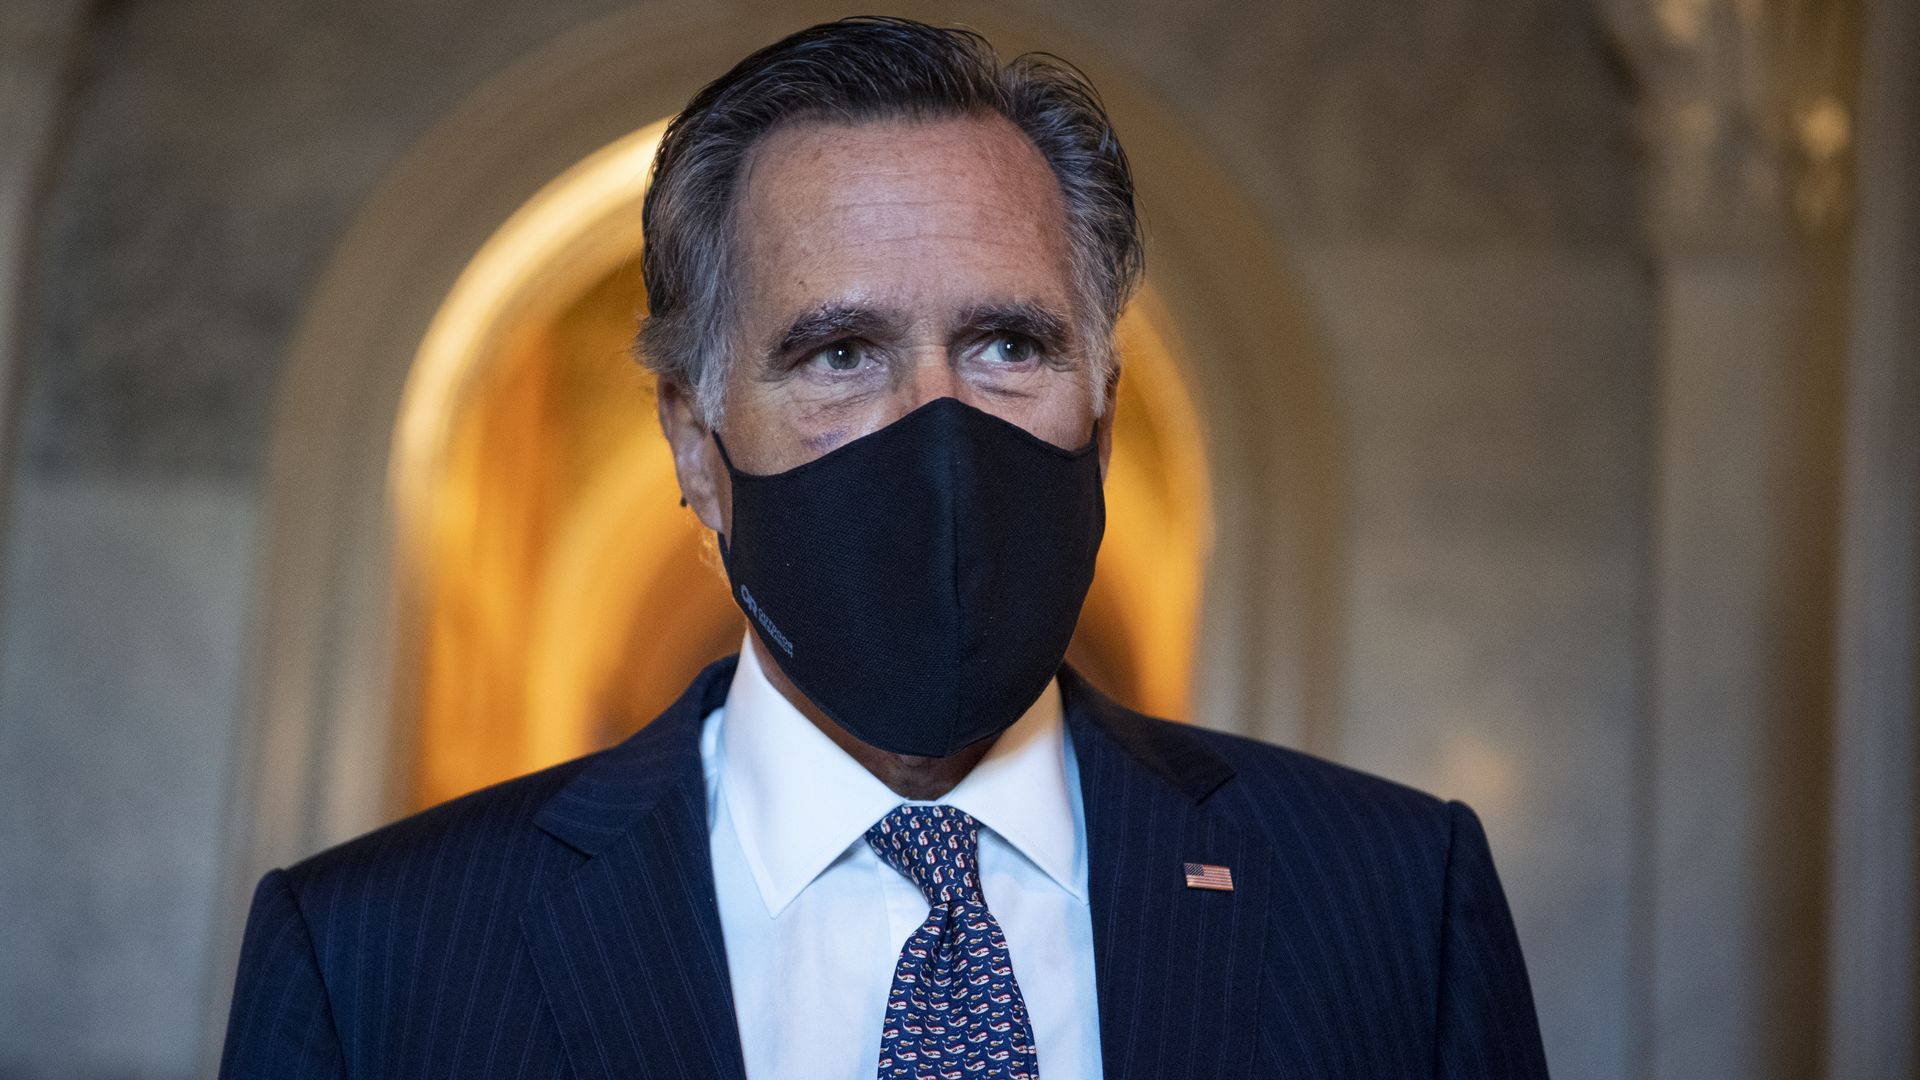 Mitt Romney wears a suit and face mask